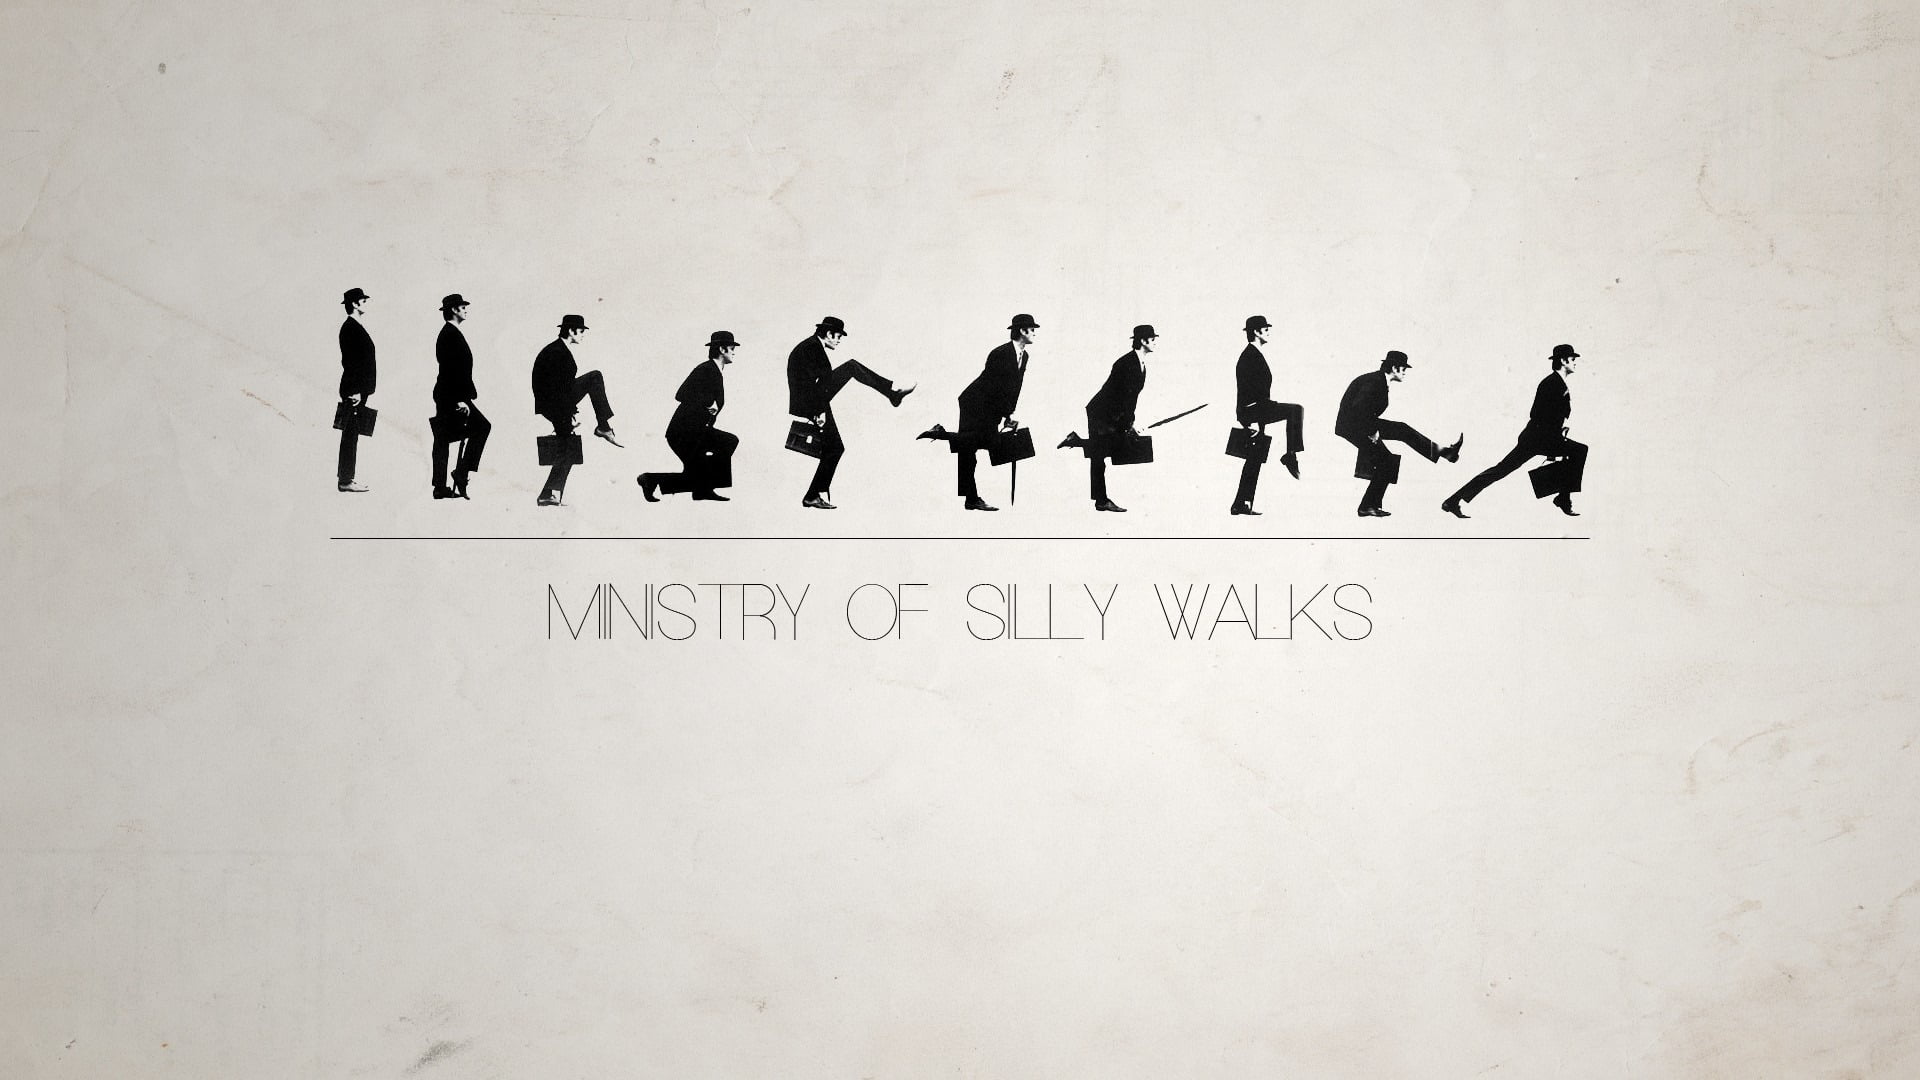 Ministry of Silly Walk, Monty Python, Ministry of Silly Walks